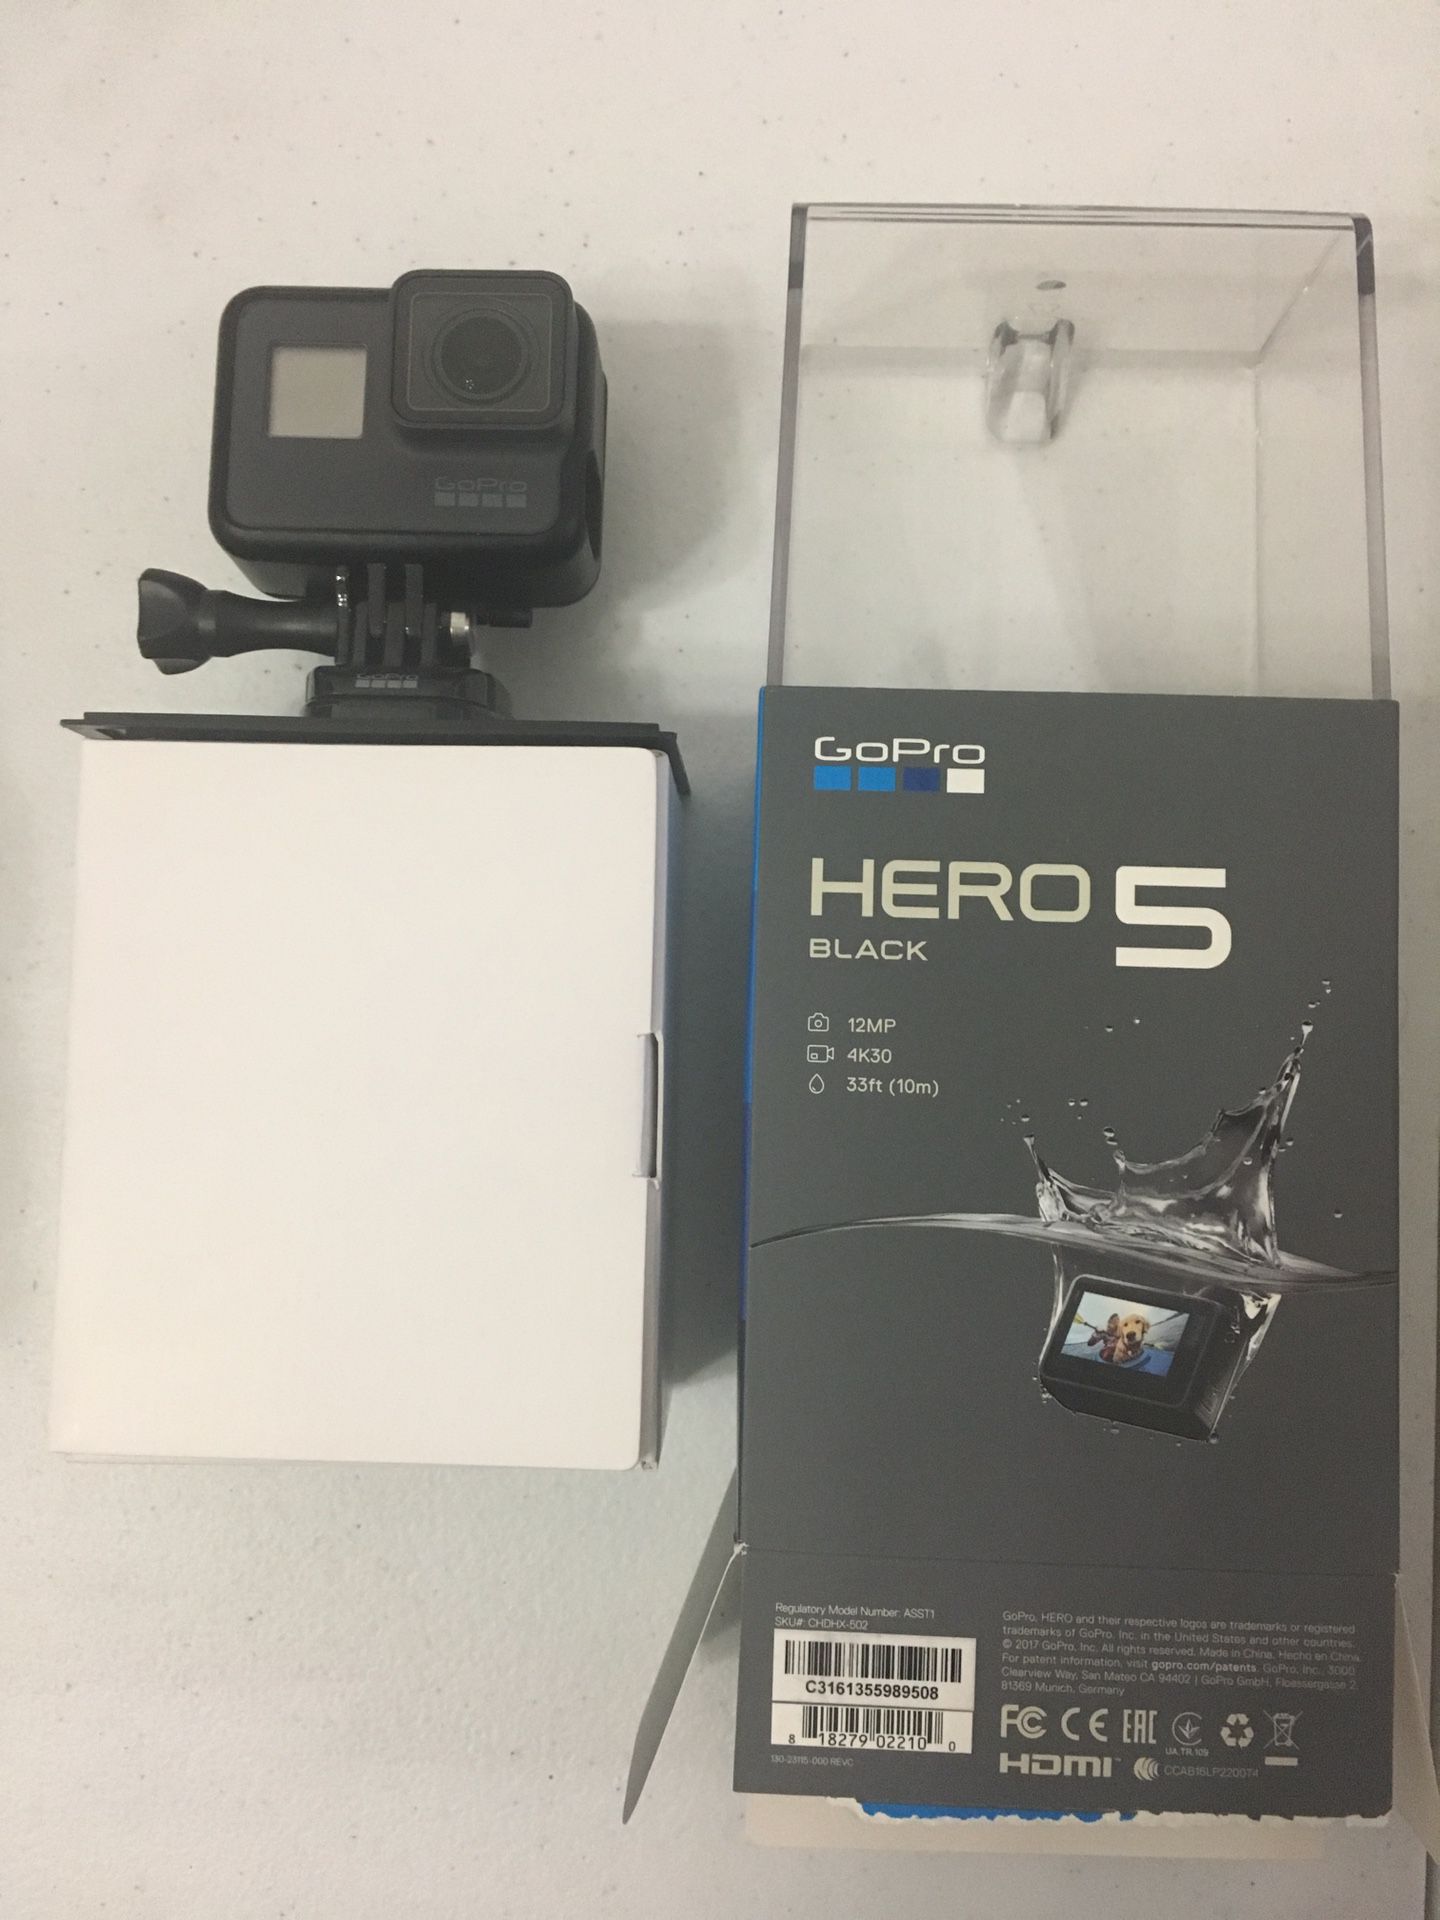 Open box, but never used GoPro Hero 5 Black